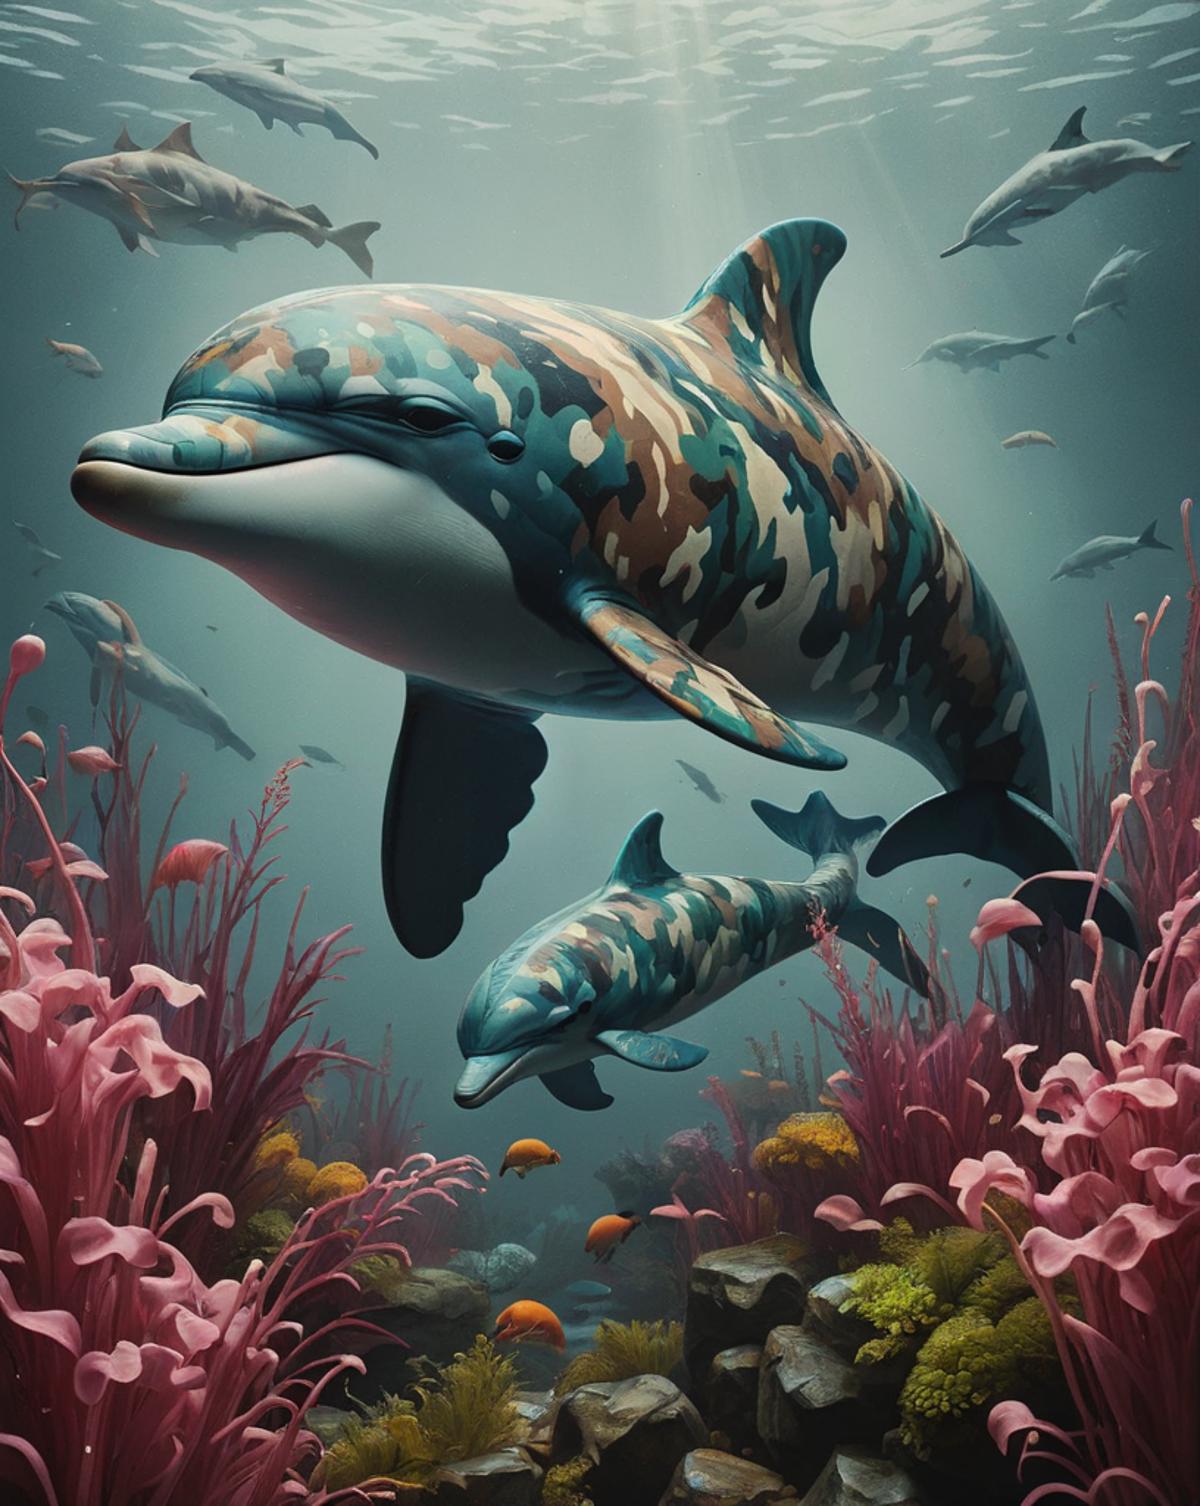 A digital painting of a mother dolphin and her calf in the ocean among sea creatures.